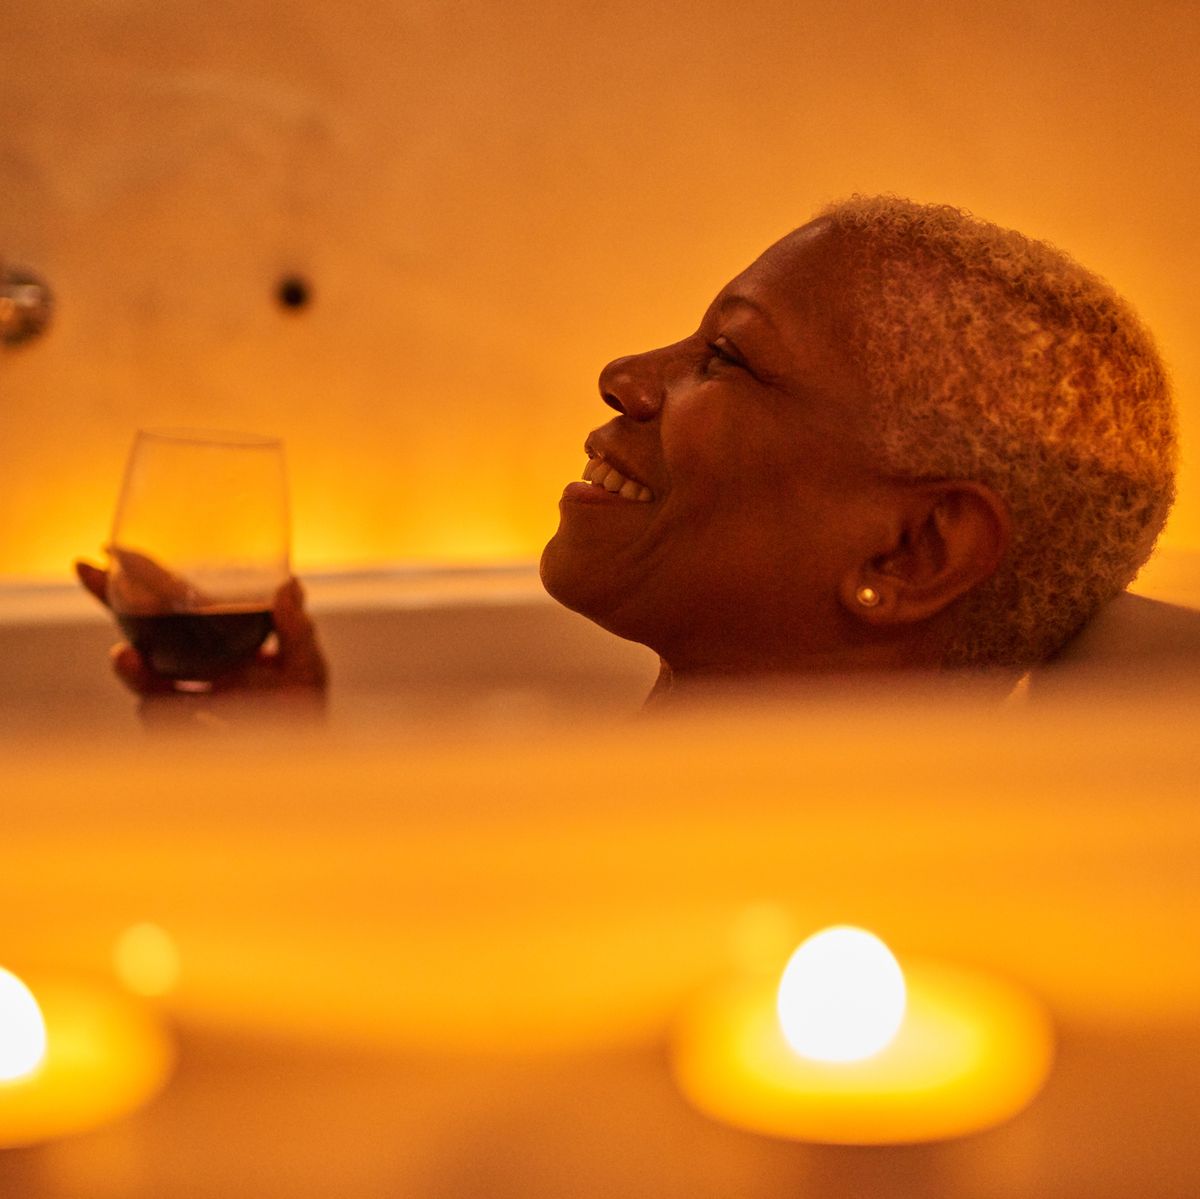 7 reasons why baths are great for your health